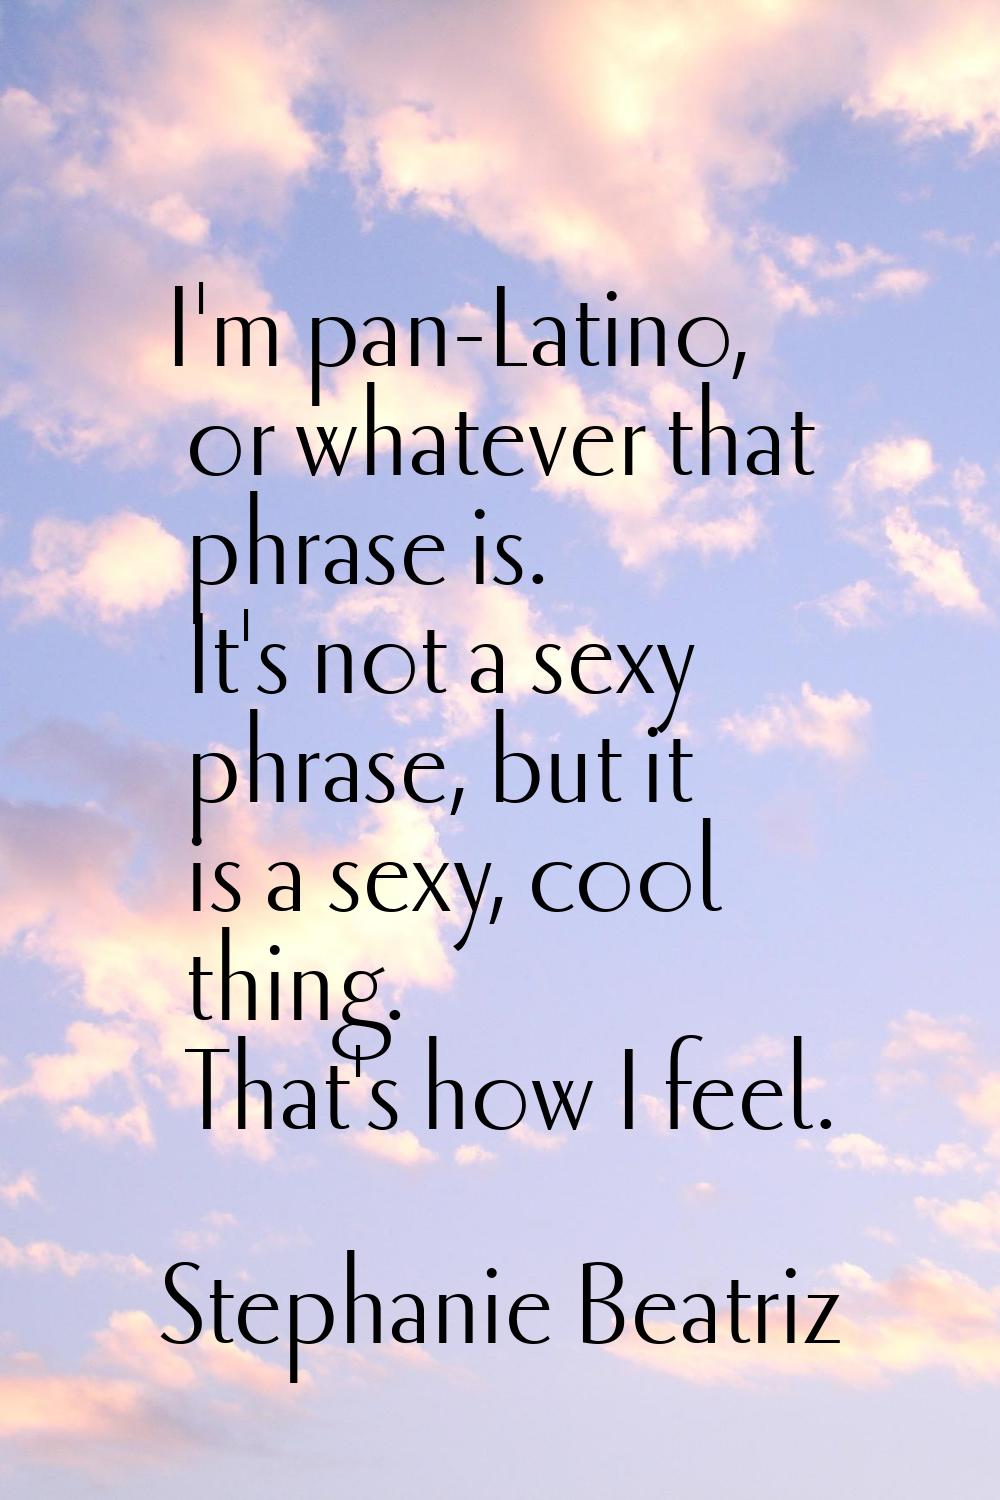 I'm pan-Latino, or whatever that phrase is. It's not a sexy phrase, but it is a sexy, cool thing. T